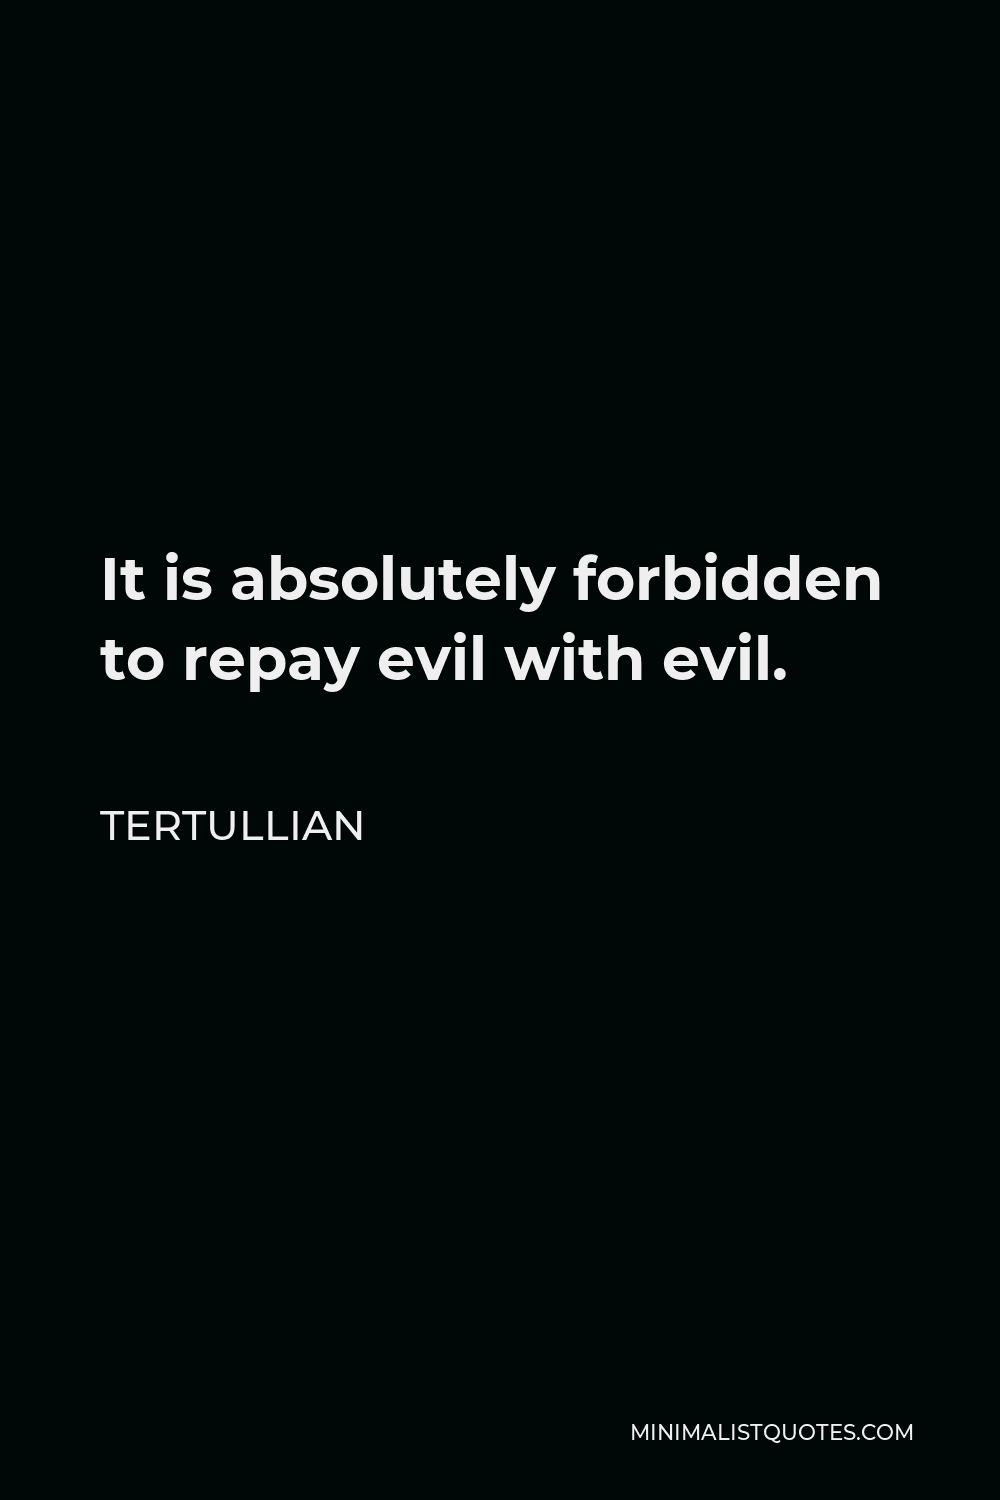 Tertullian Quote - It is absolutely forbidden to repay evil with evil.